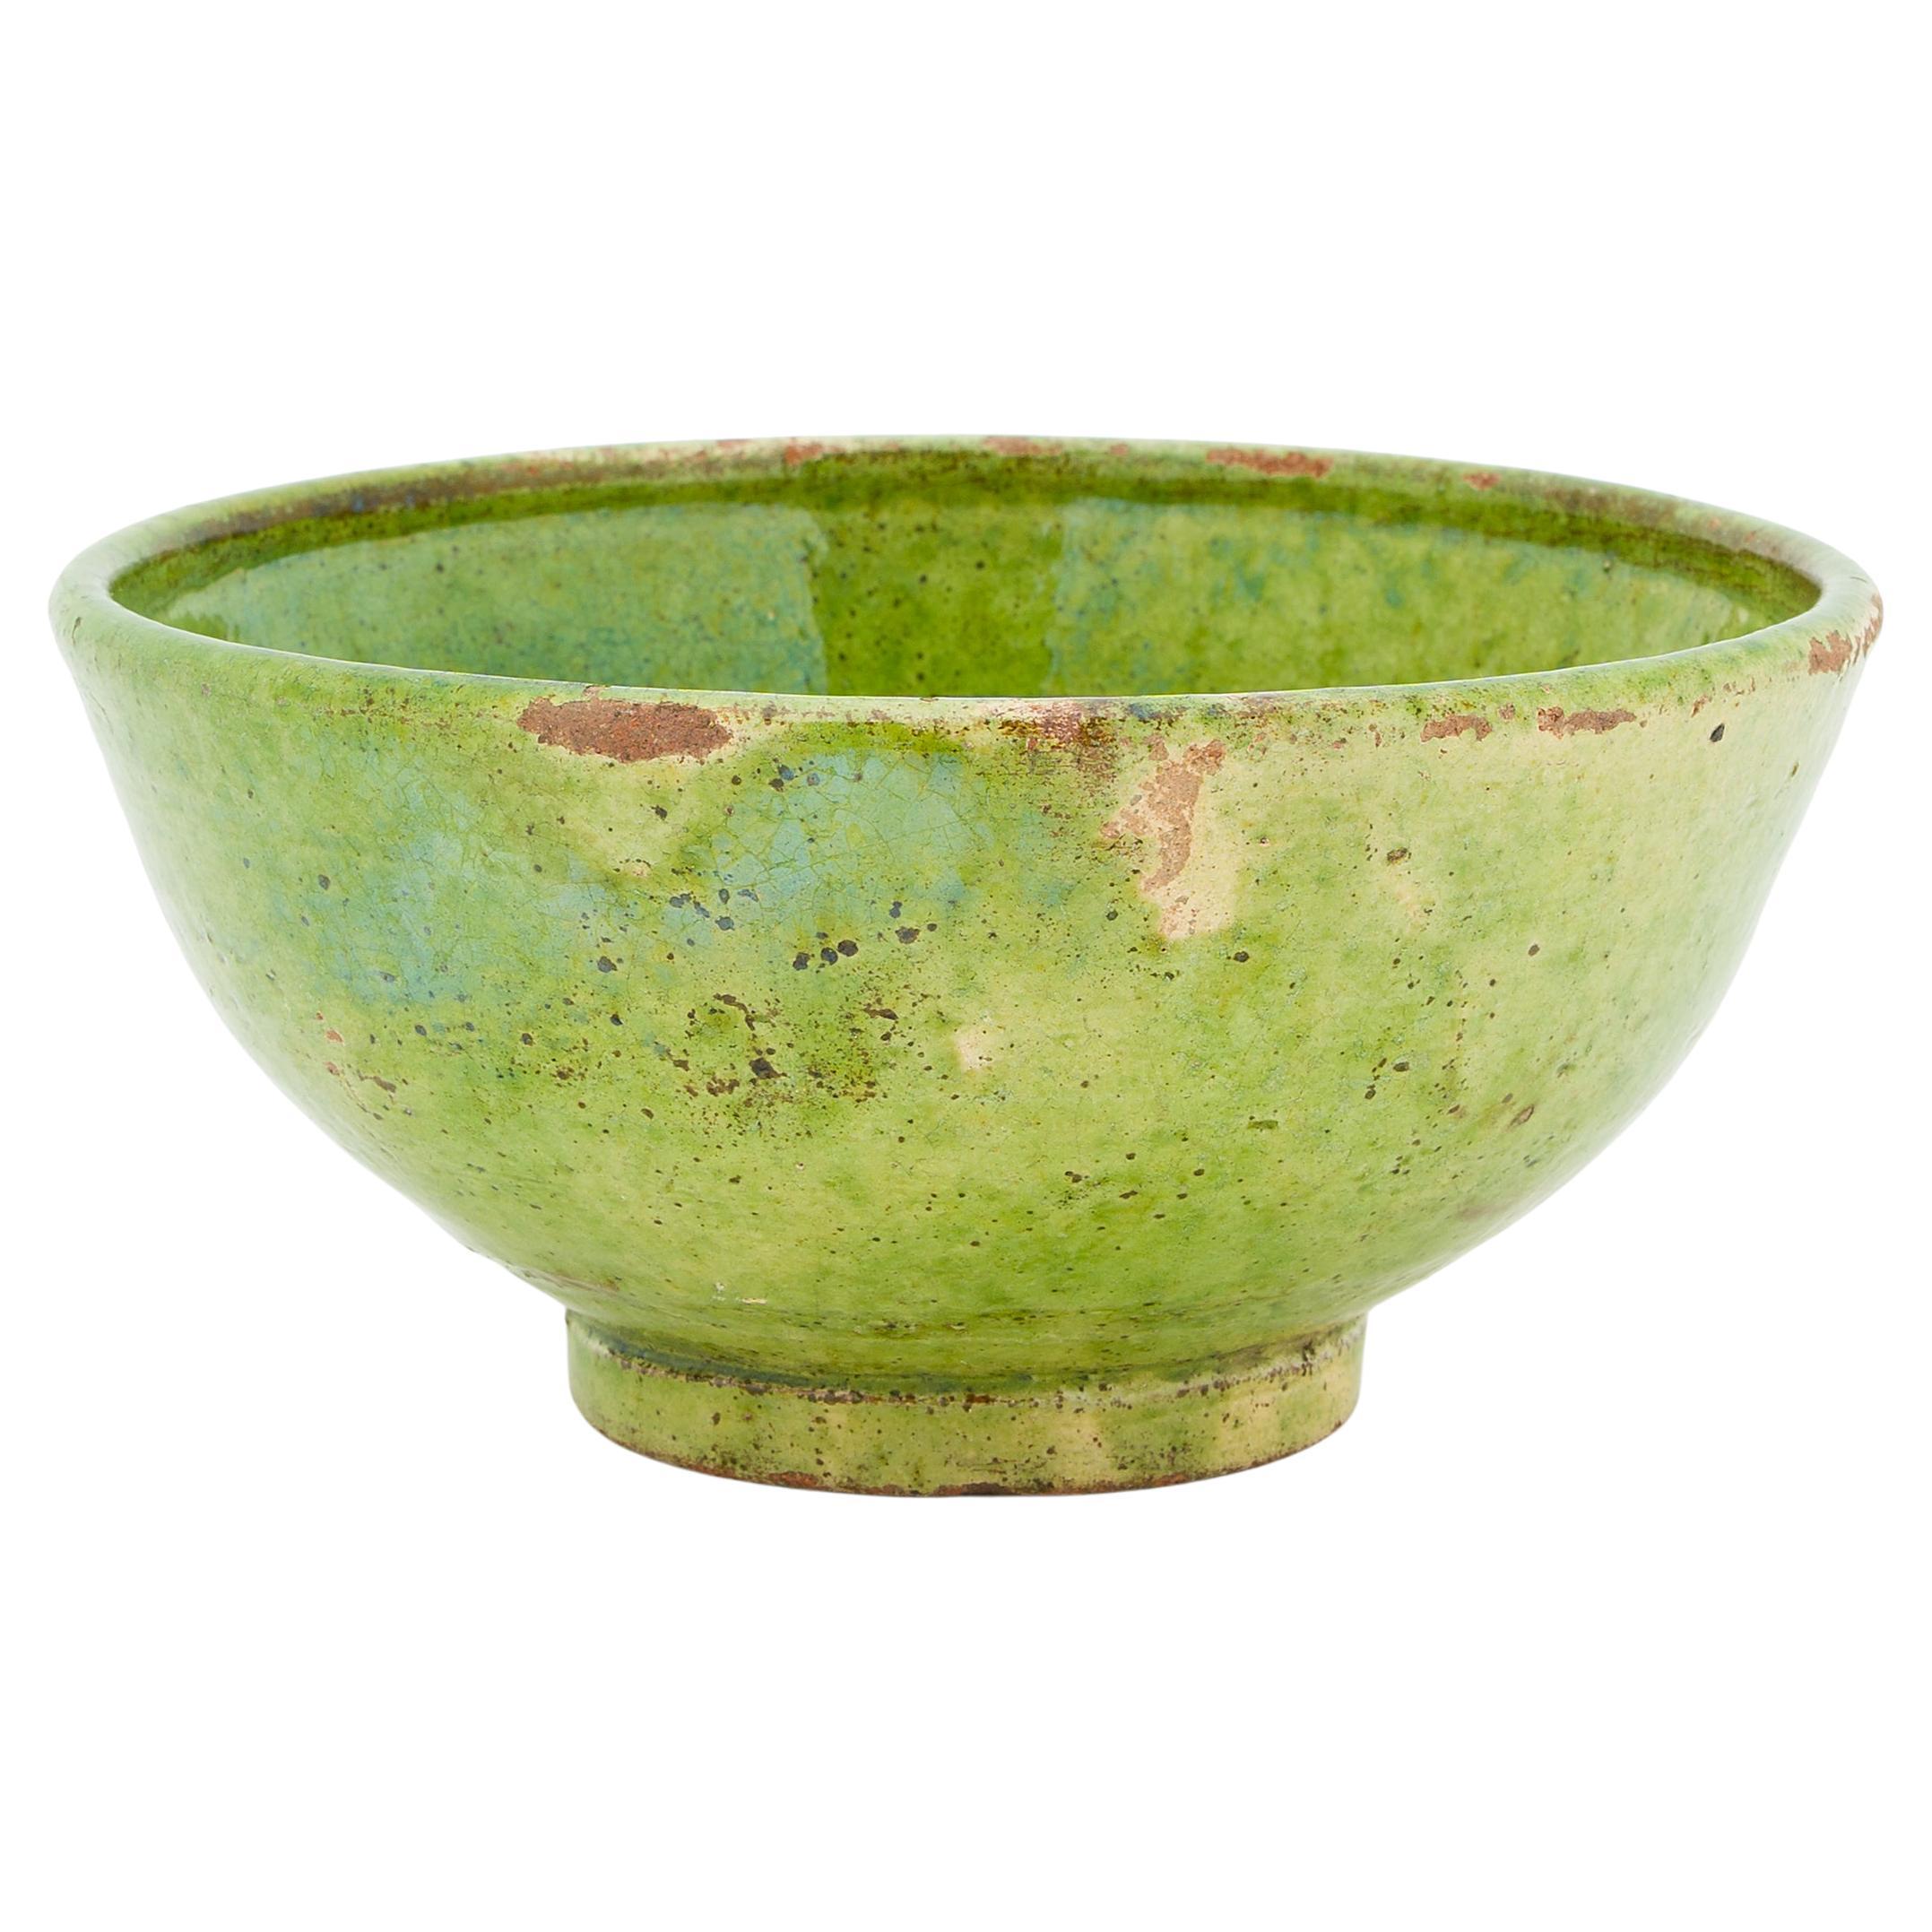 Chinese Green Glazed Footed Bowl, c. 1850